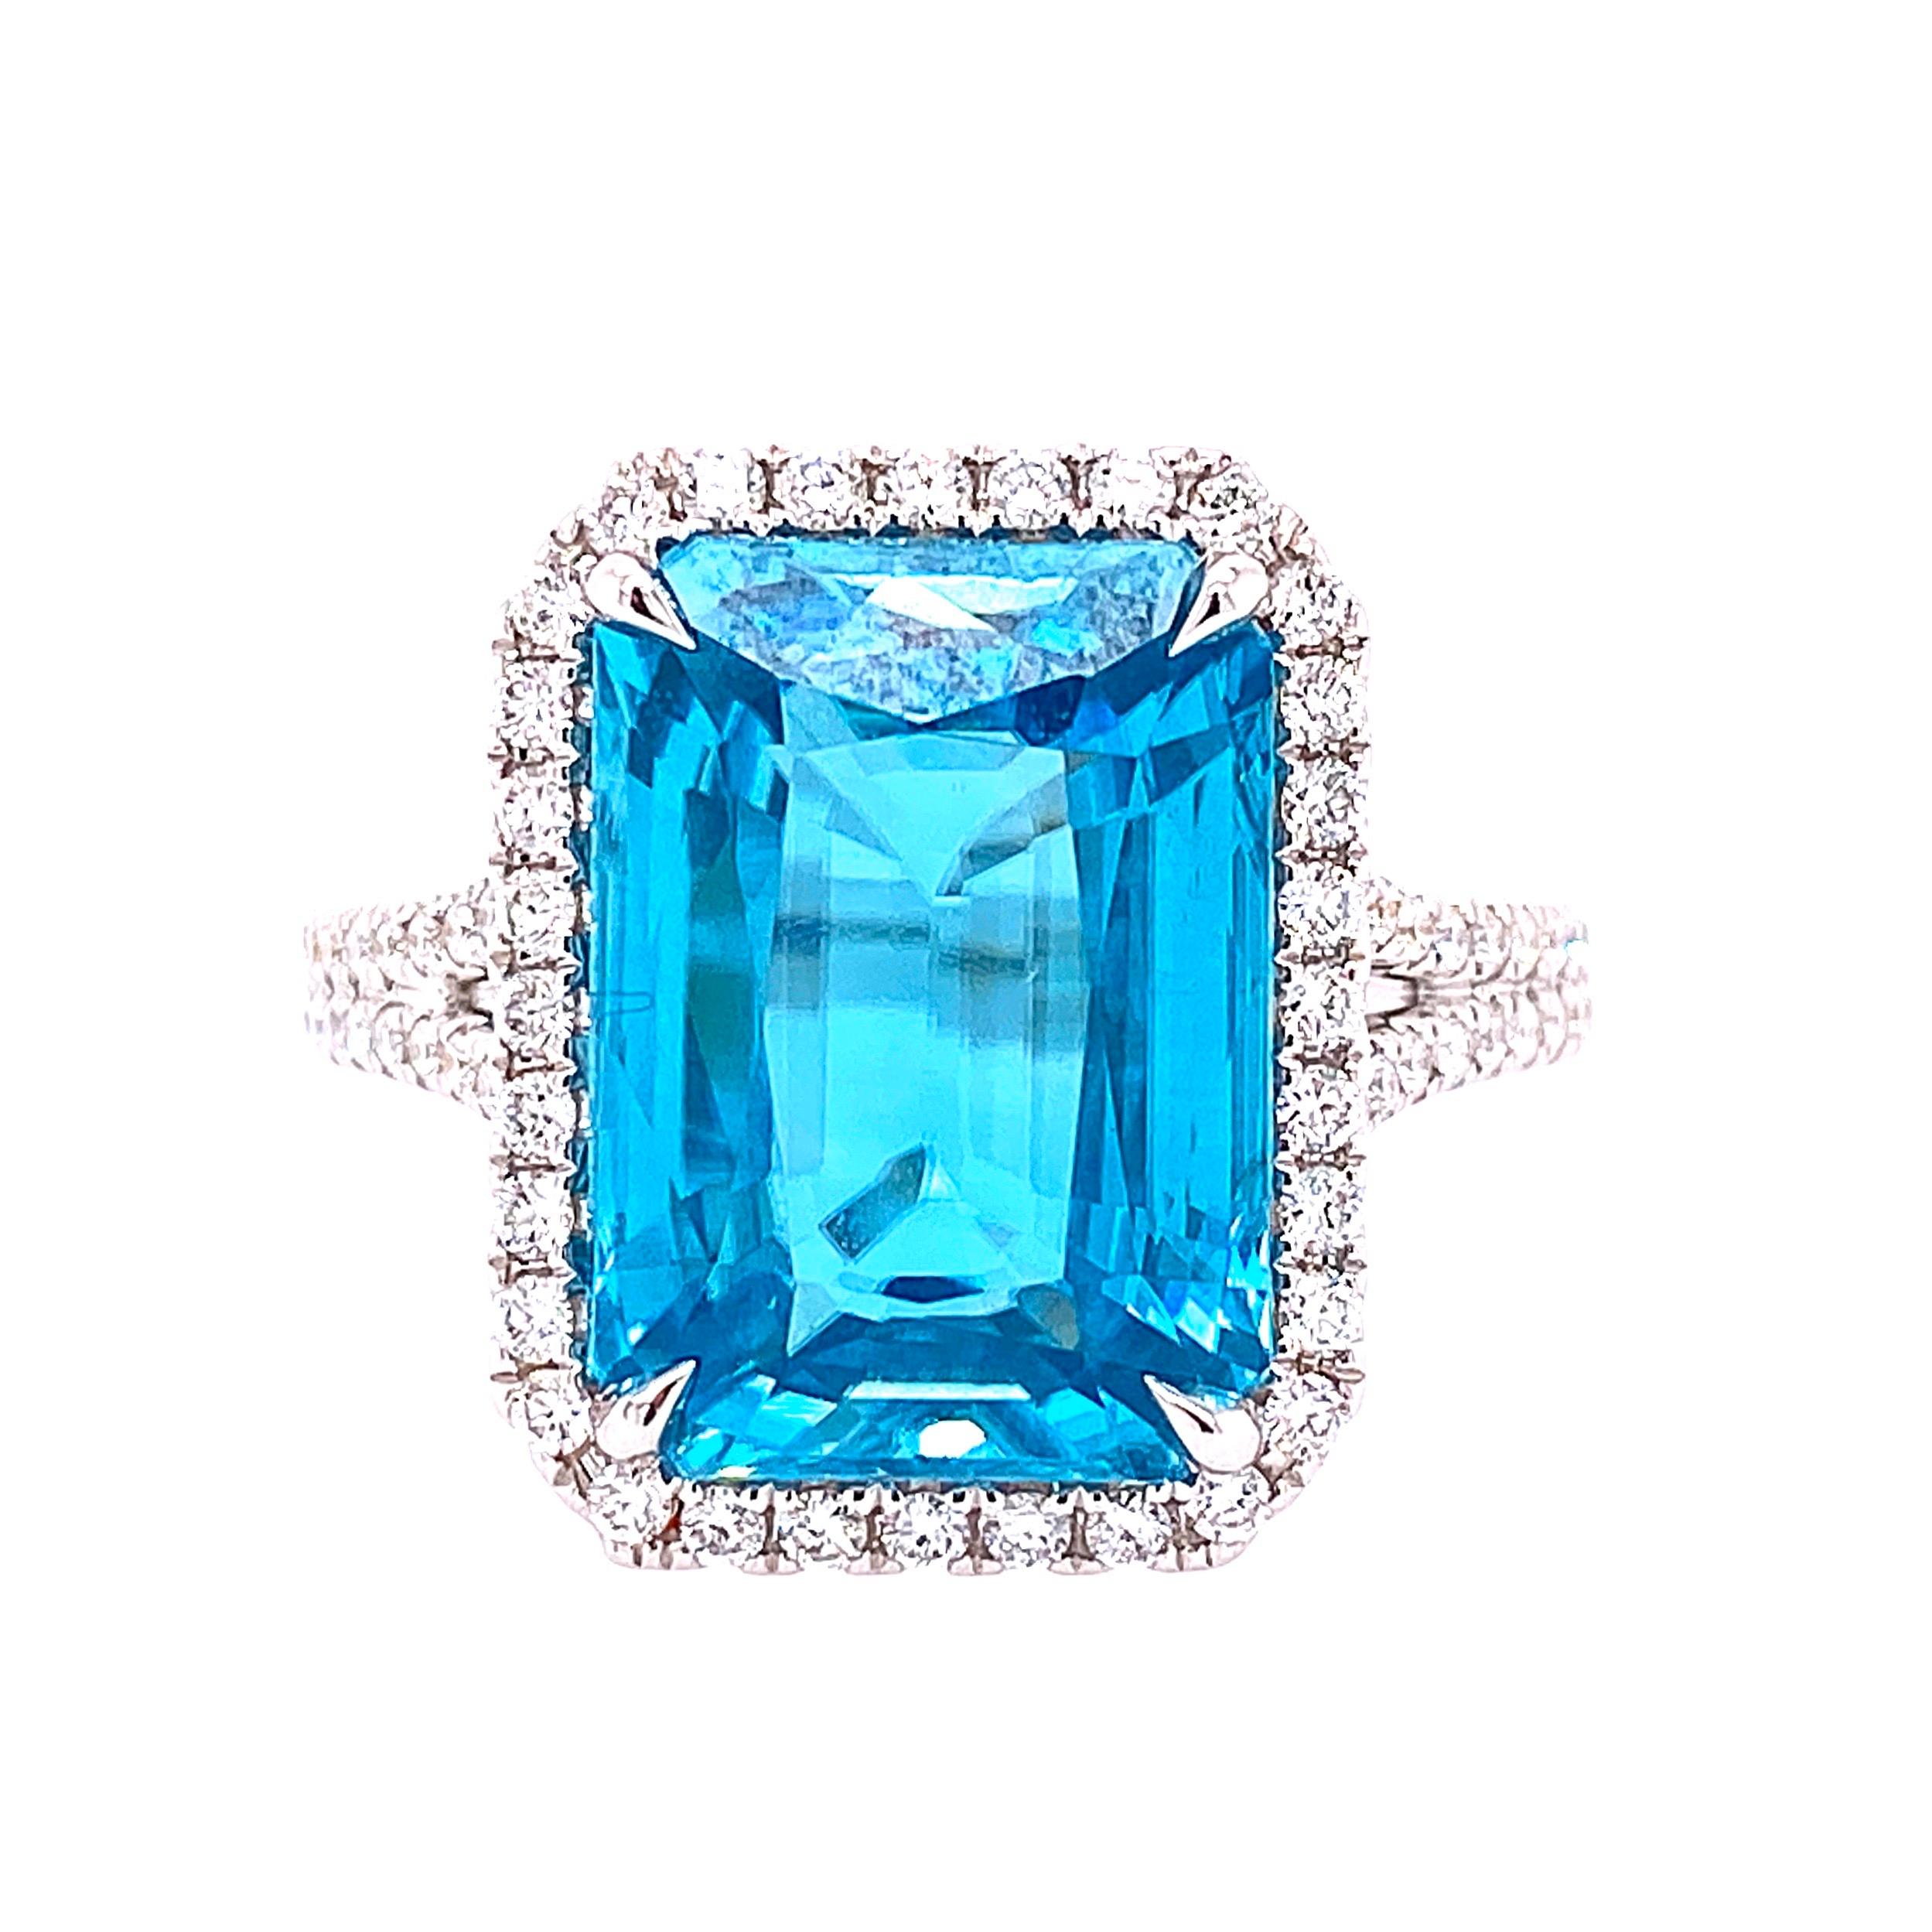 This stunning Cocktail Ring features a beautiful 9.91 Carat Emerald Cut Blue Zircon with a Diamond Halo, on a Double Diamond Shank. This Ring is set in 18K White Gold. Total Diamond Weight = 0.41 carats. Ring Size is 6 1/2.